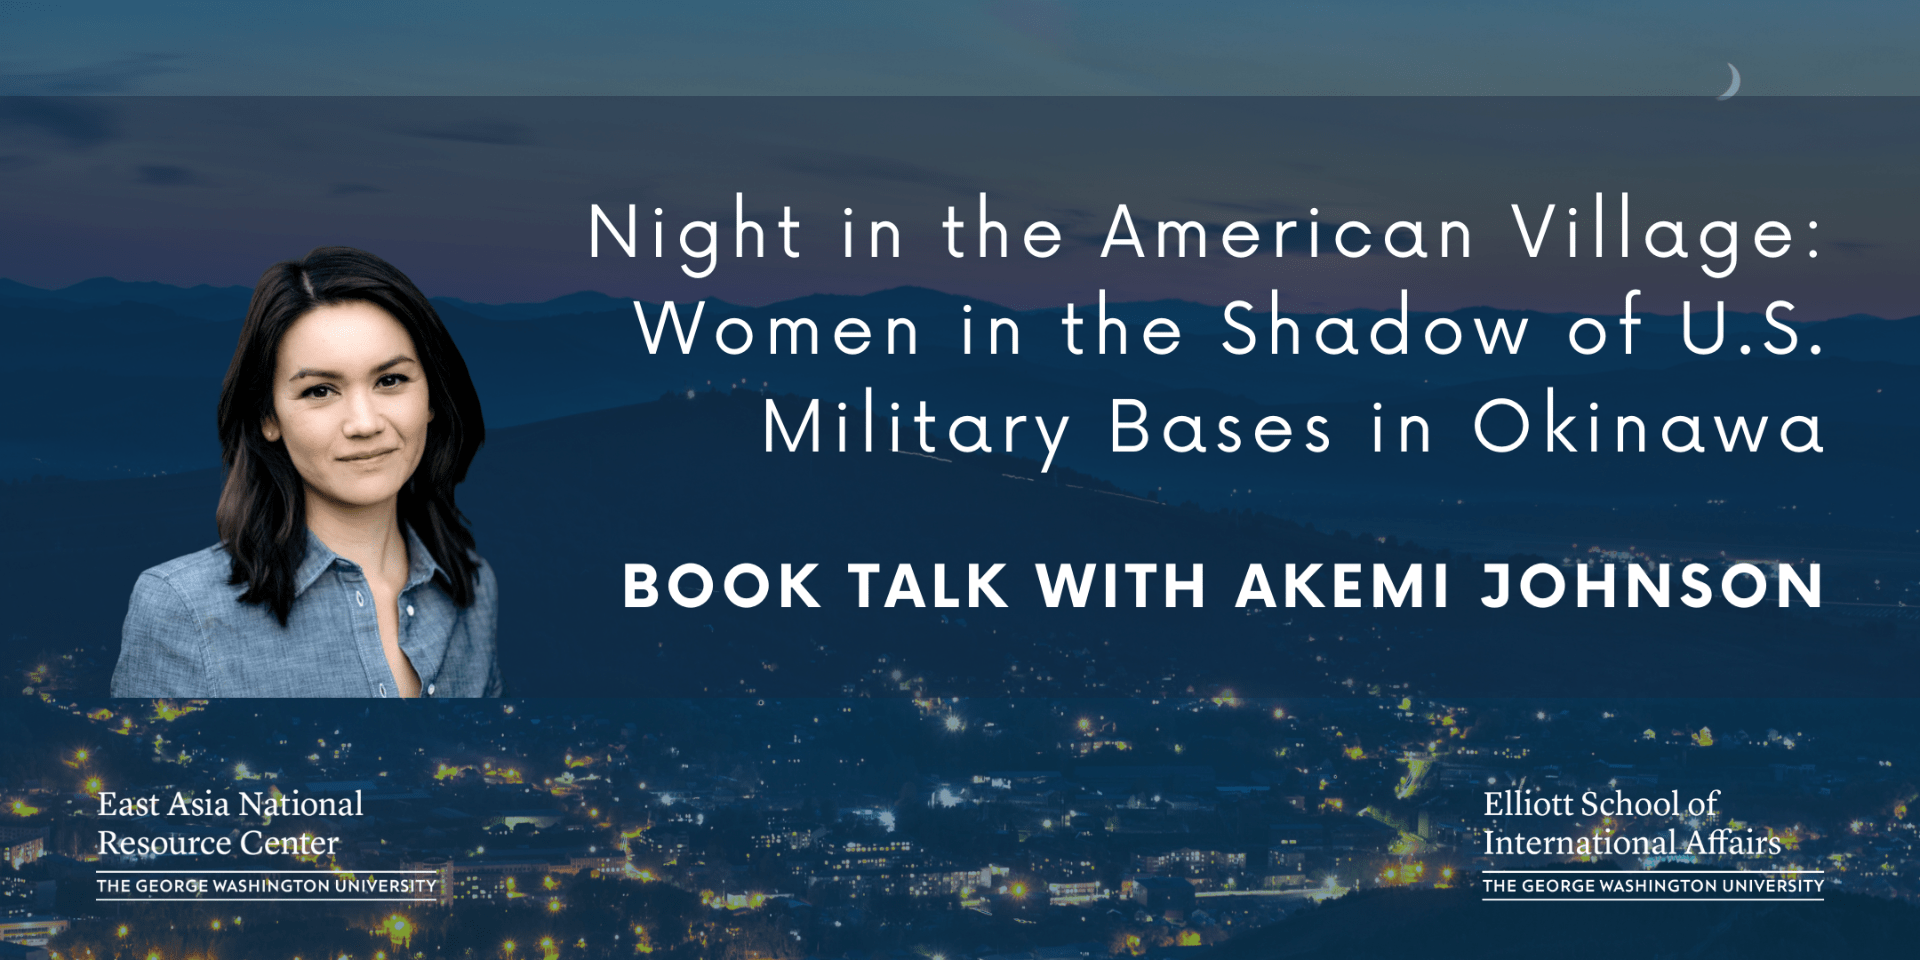 Event banner with headshot; text: Night in the American Village: Women in the Shadow of the U.S. Military Bases in Okinawa, Book Talk with Akemi Johnson. Logos: East Asia National Resource Center; Elliott School of International Affairs, The George Washington University.